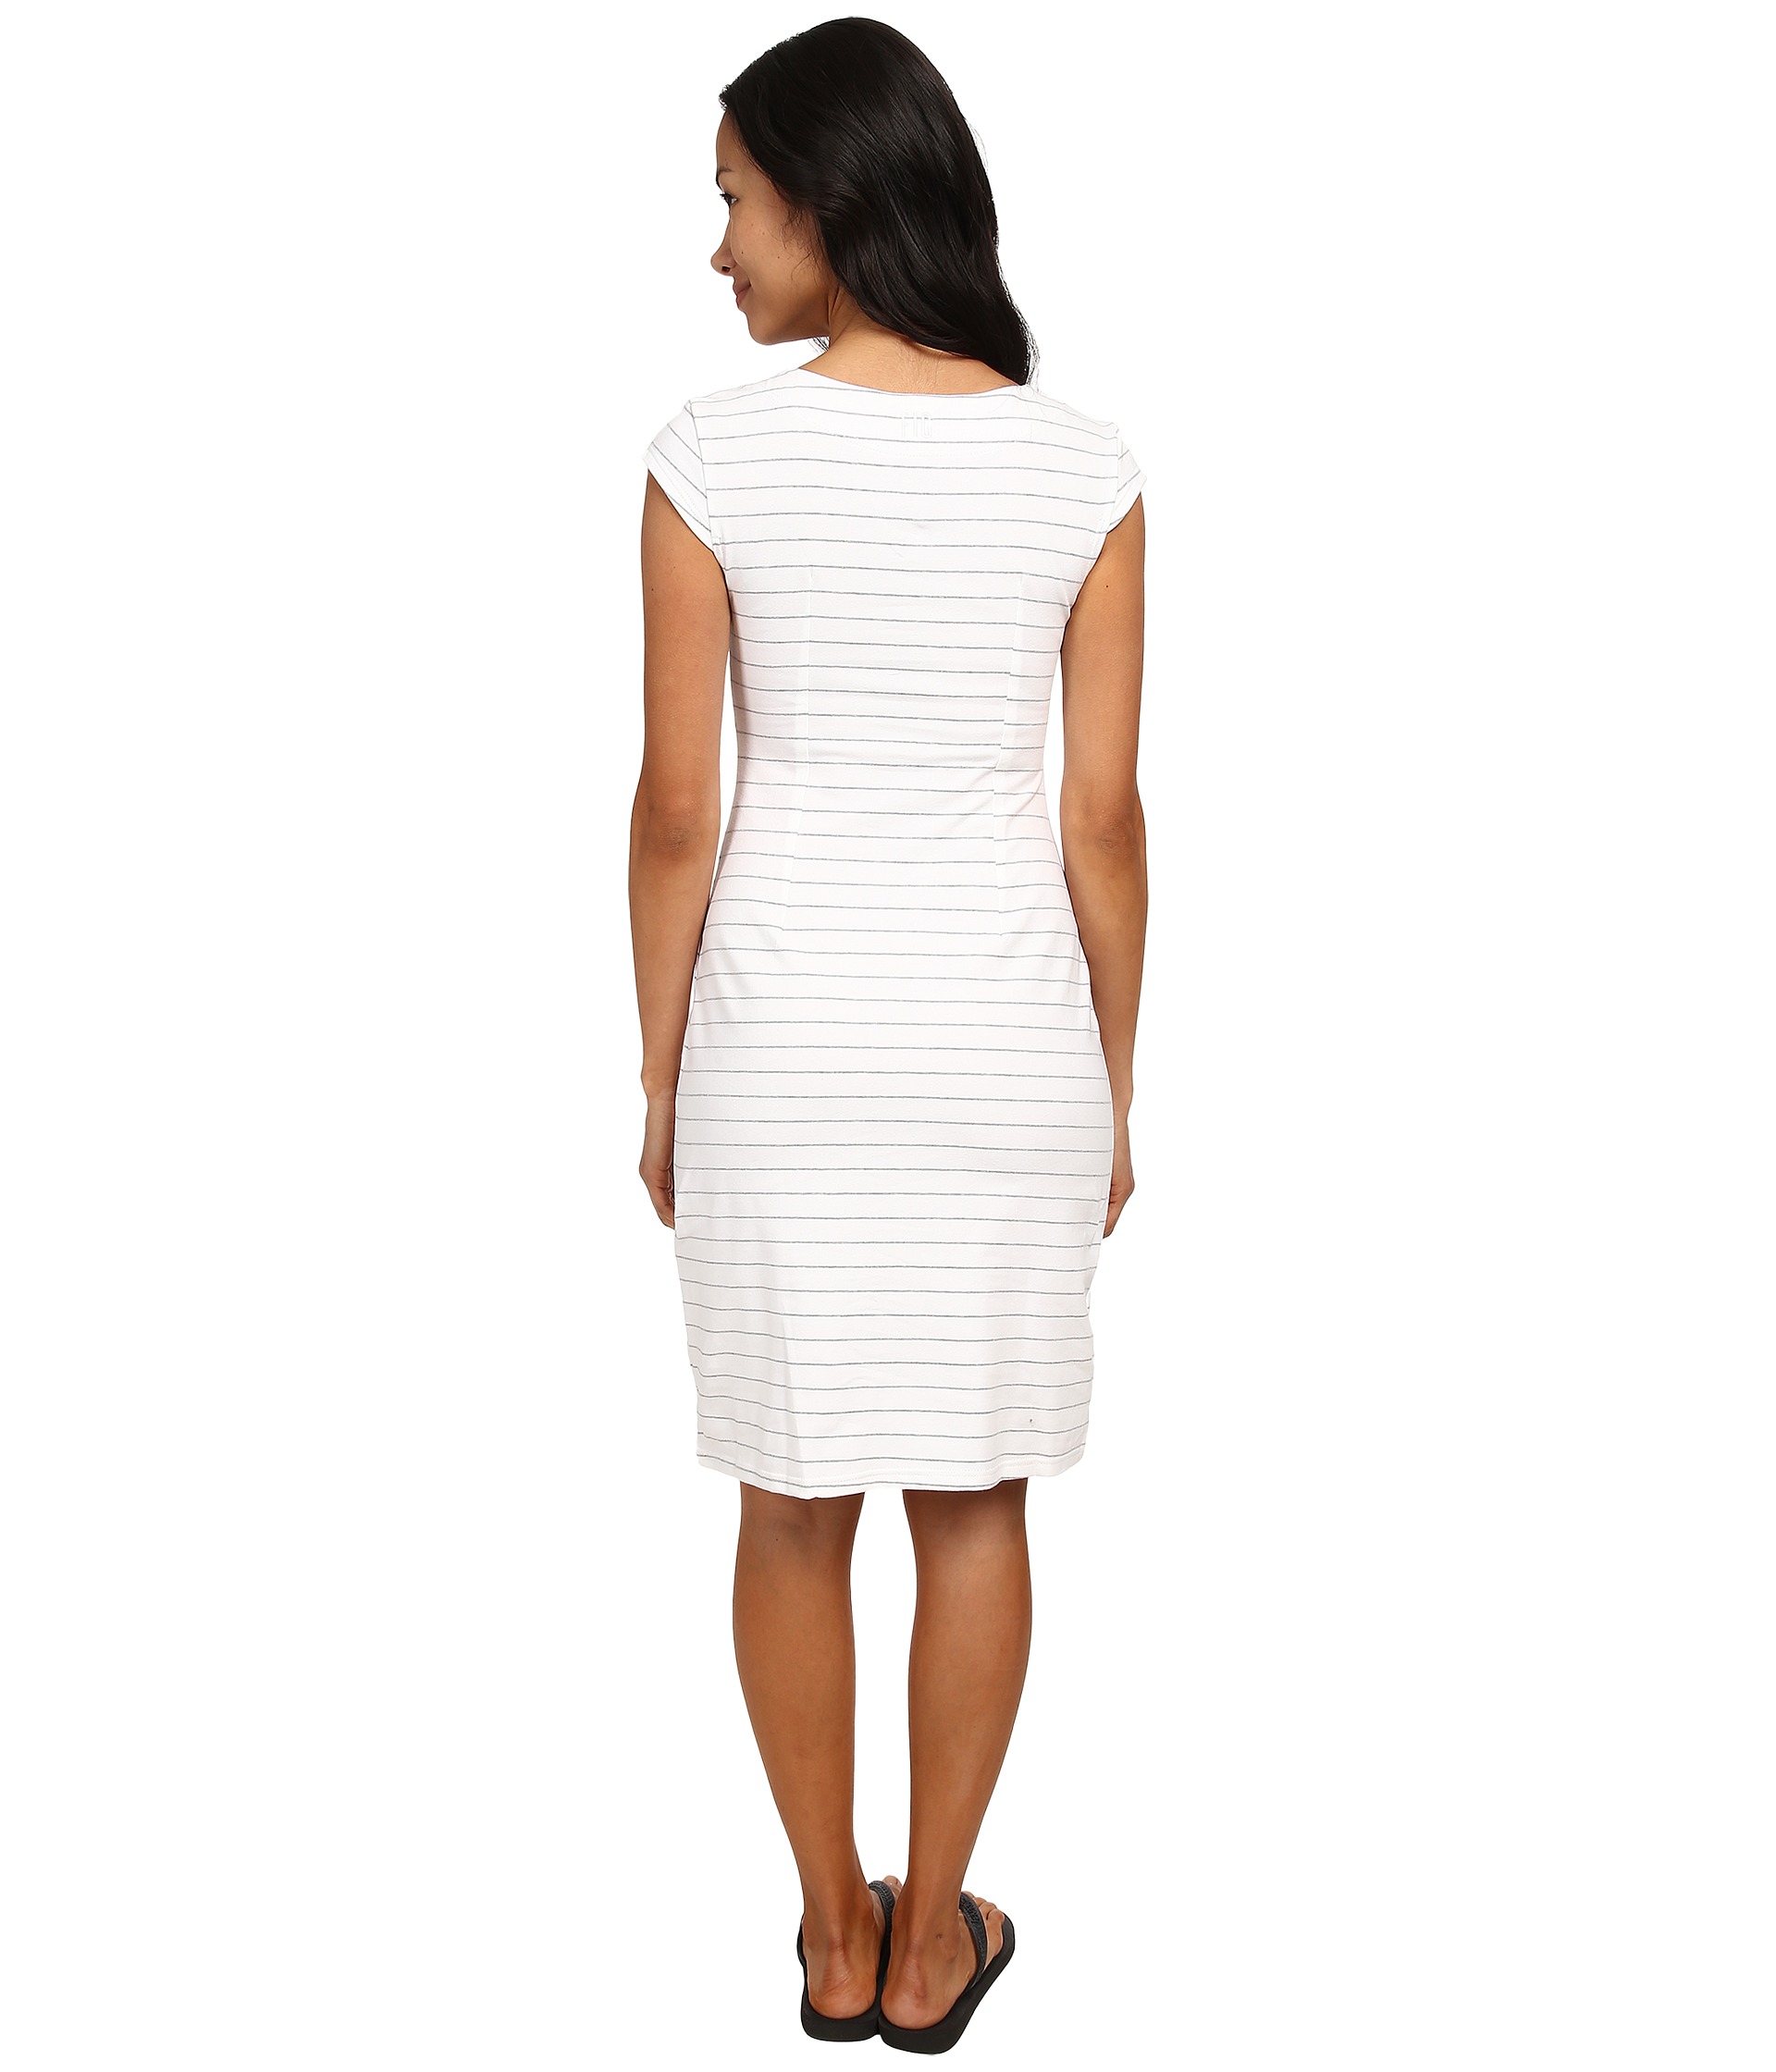 FIG Clothing Pia Dress - Zappos Free Shipping BOTH Ways